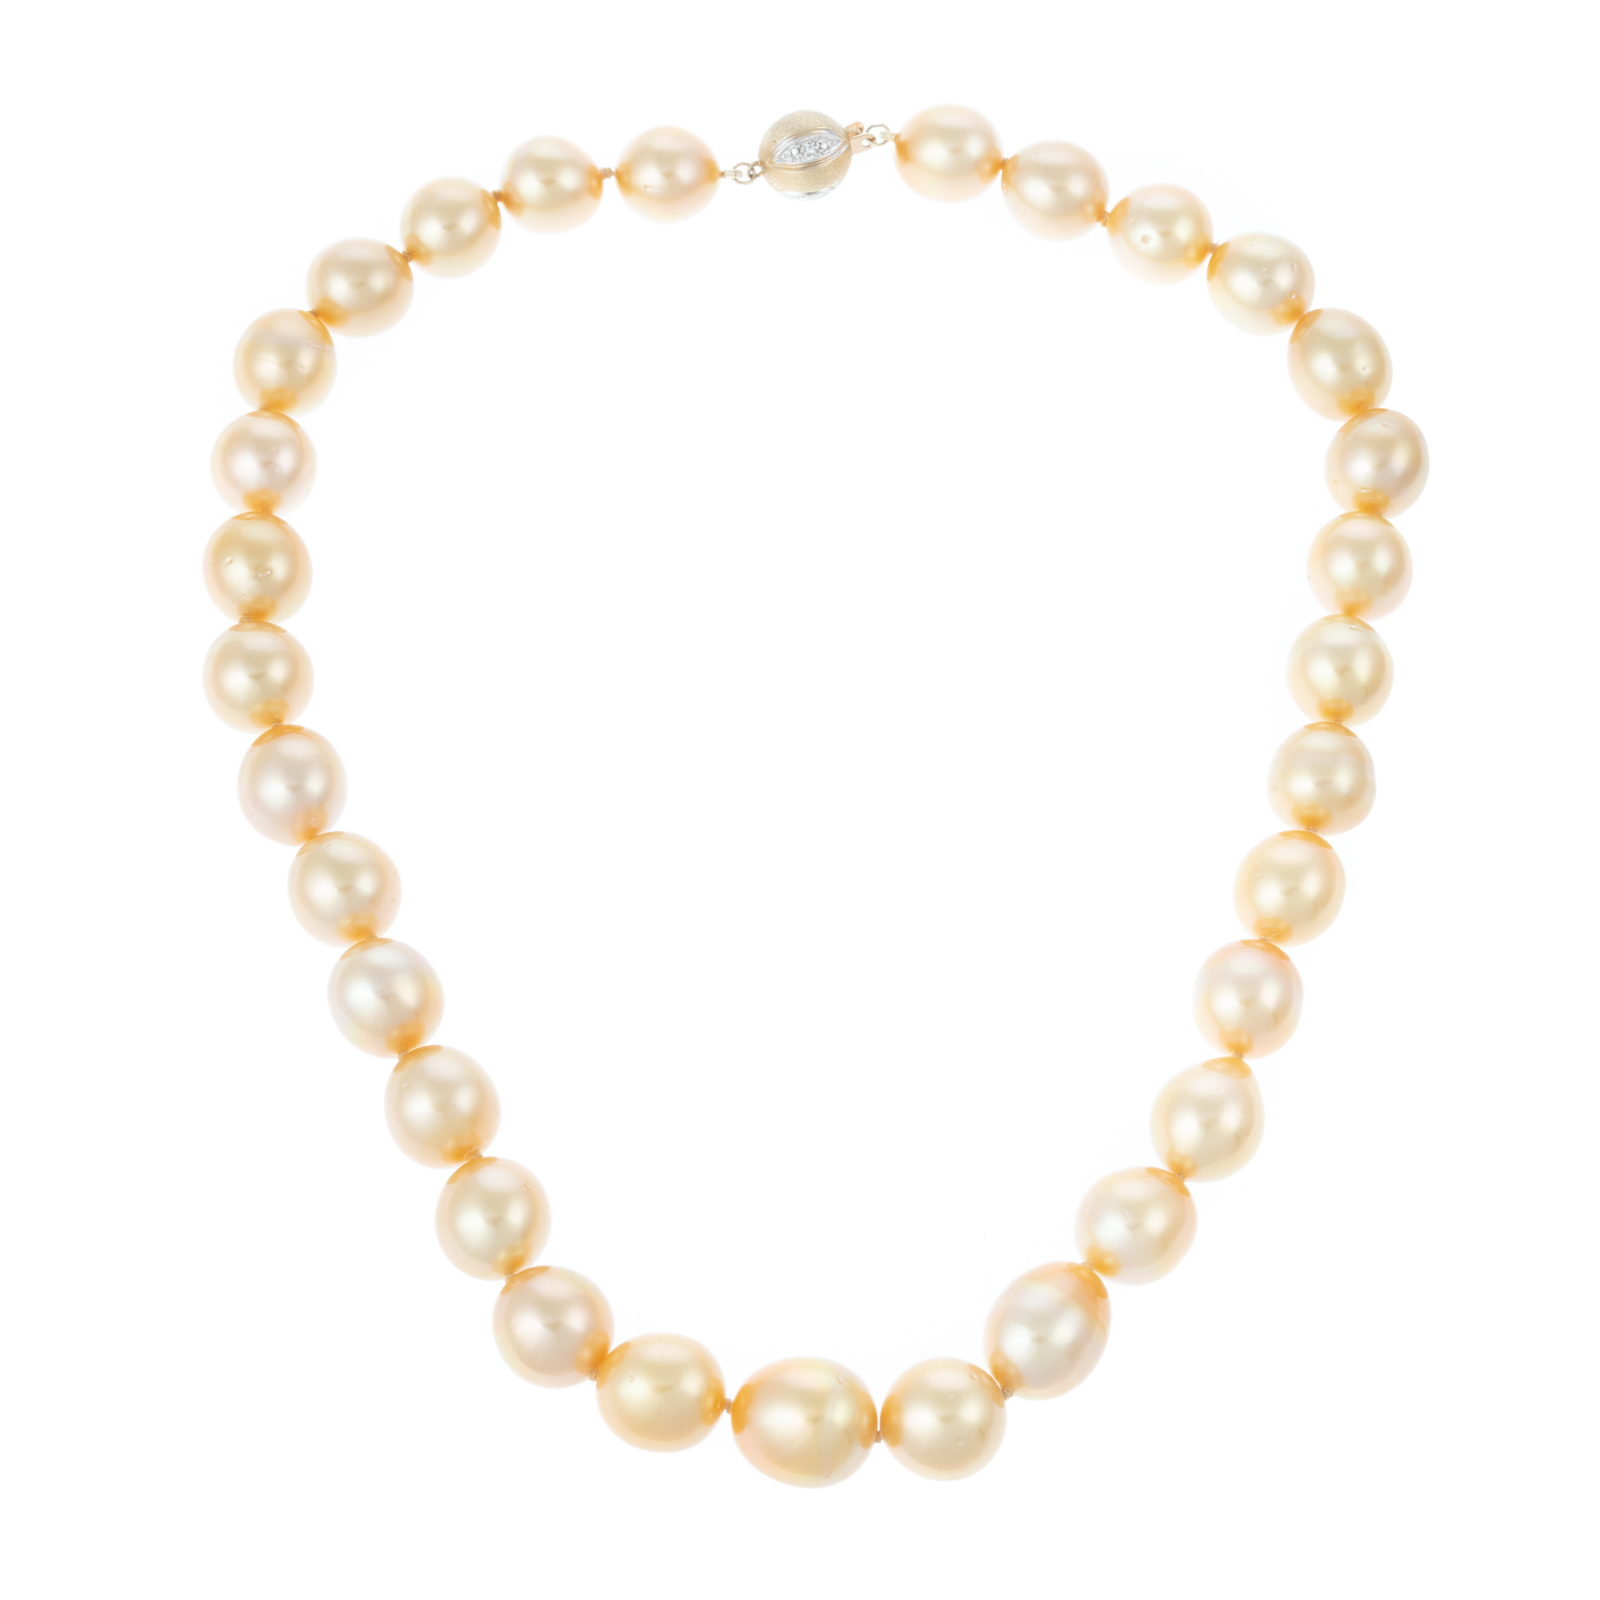 A GOLDEN SOUTH SEA PEARL NECKLACE 3386c0